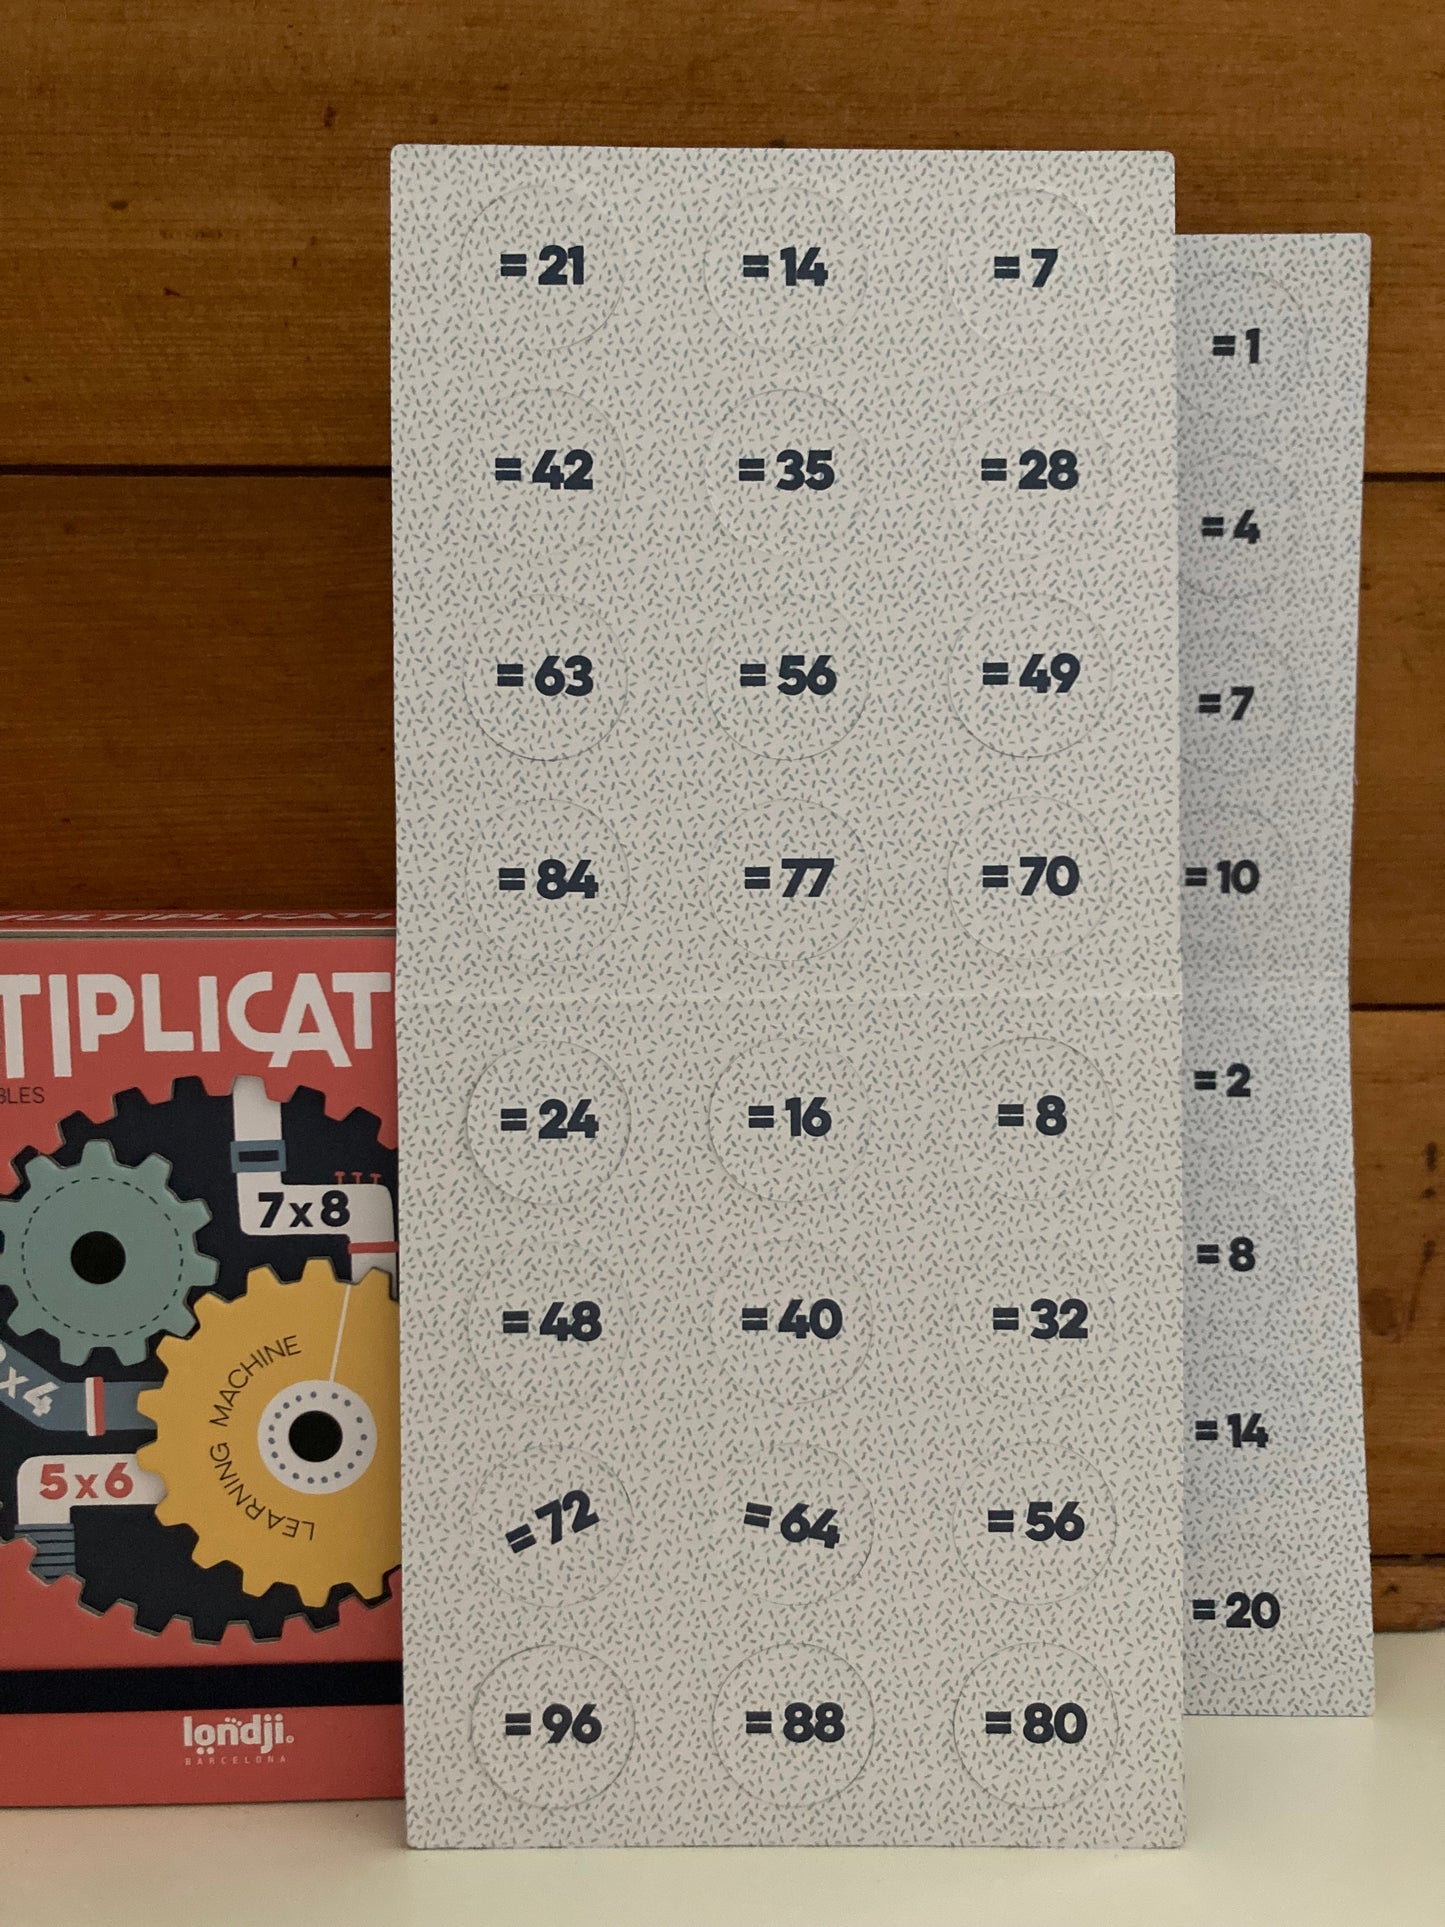 Educational Card Activity Set - MULTIPLICATION TABLES GAME